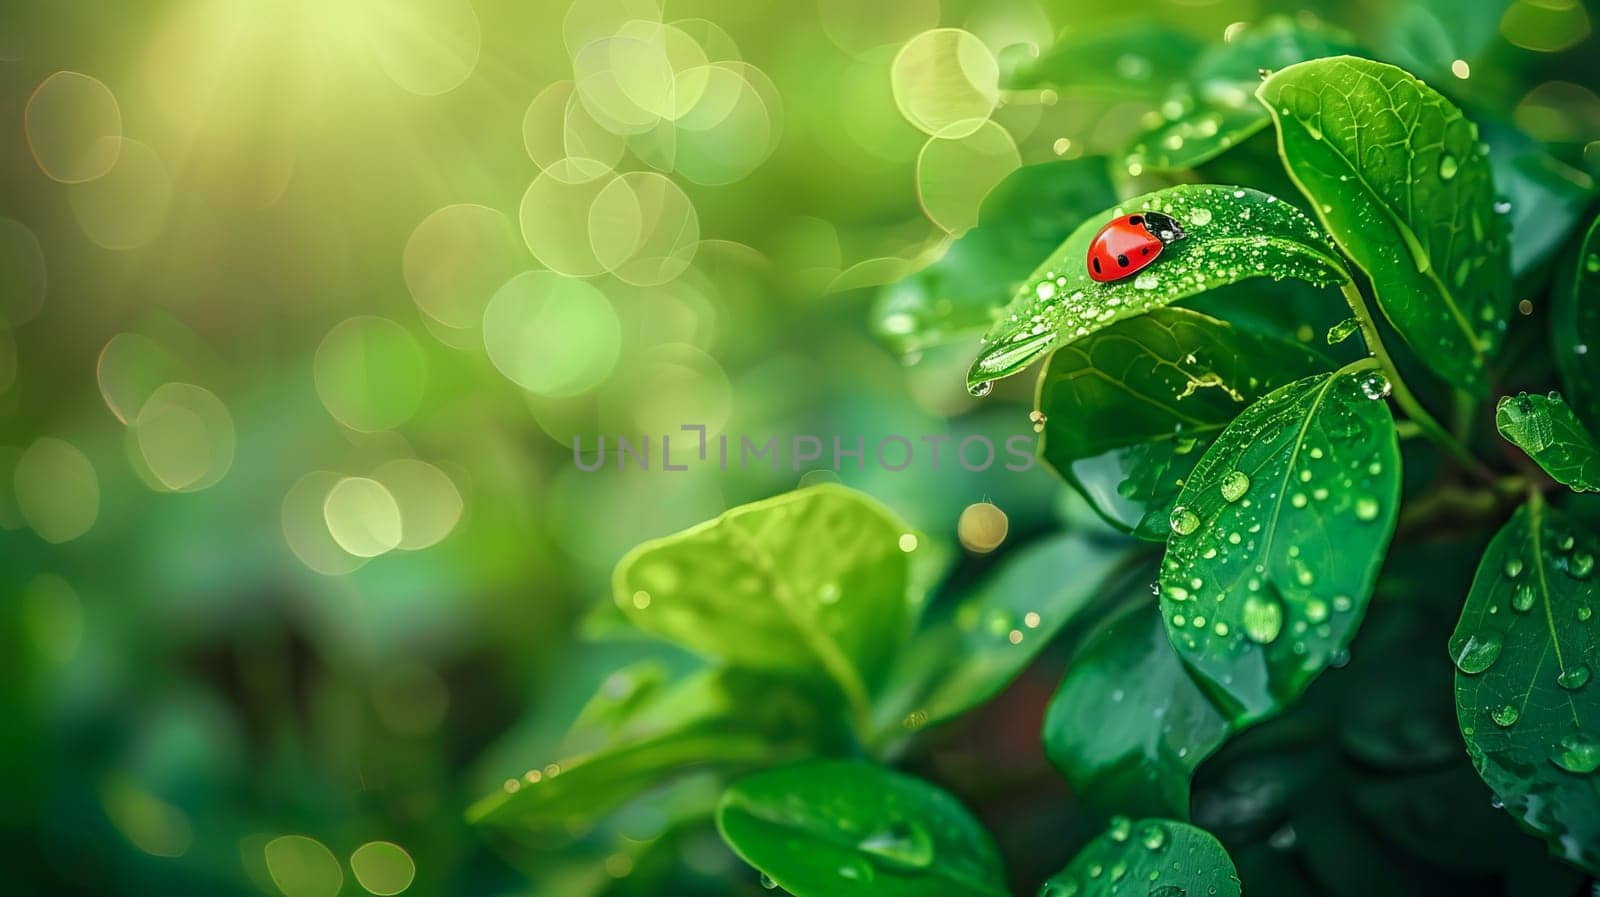 Ladybug on green leaves with morning dew, copy space. AI generated. by OlgaGubskaya